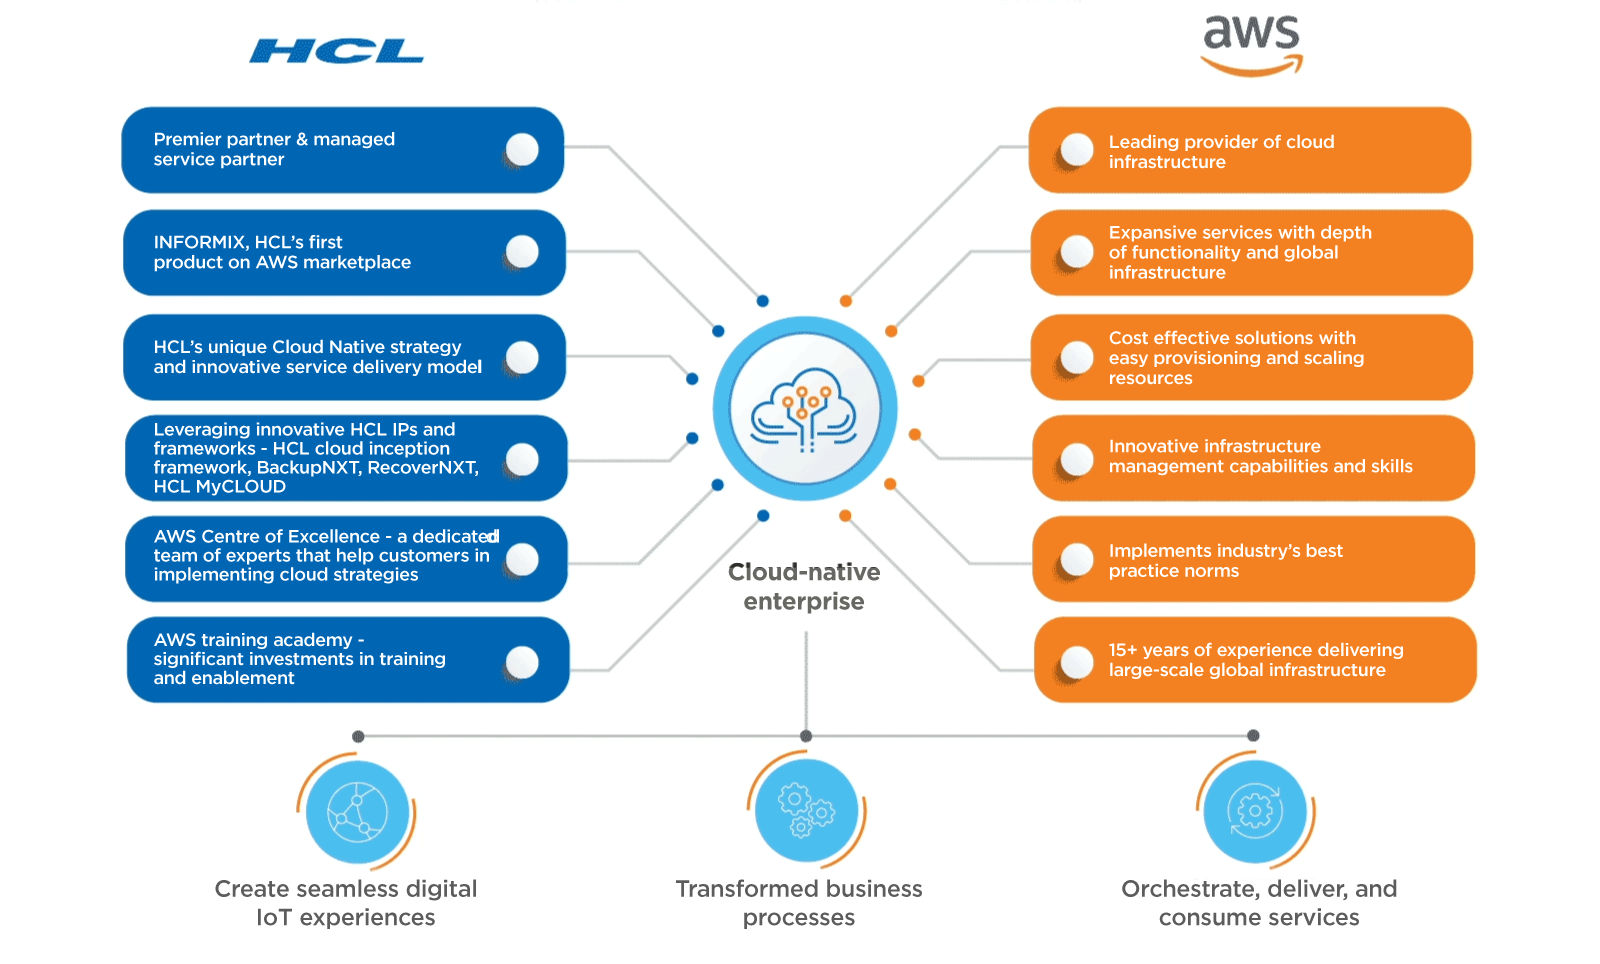 HCL and AWS - Enabling Cloud Journeys Together